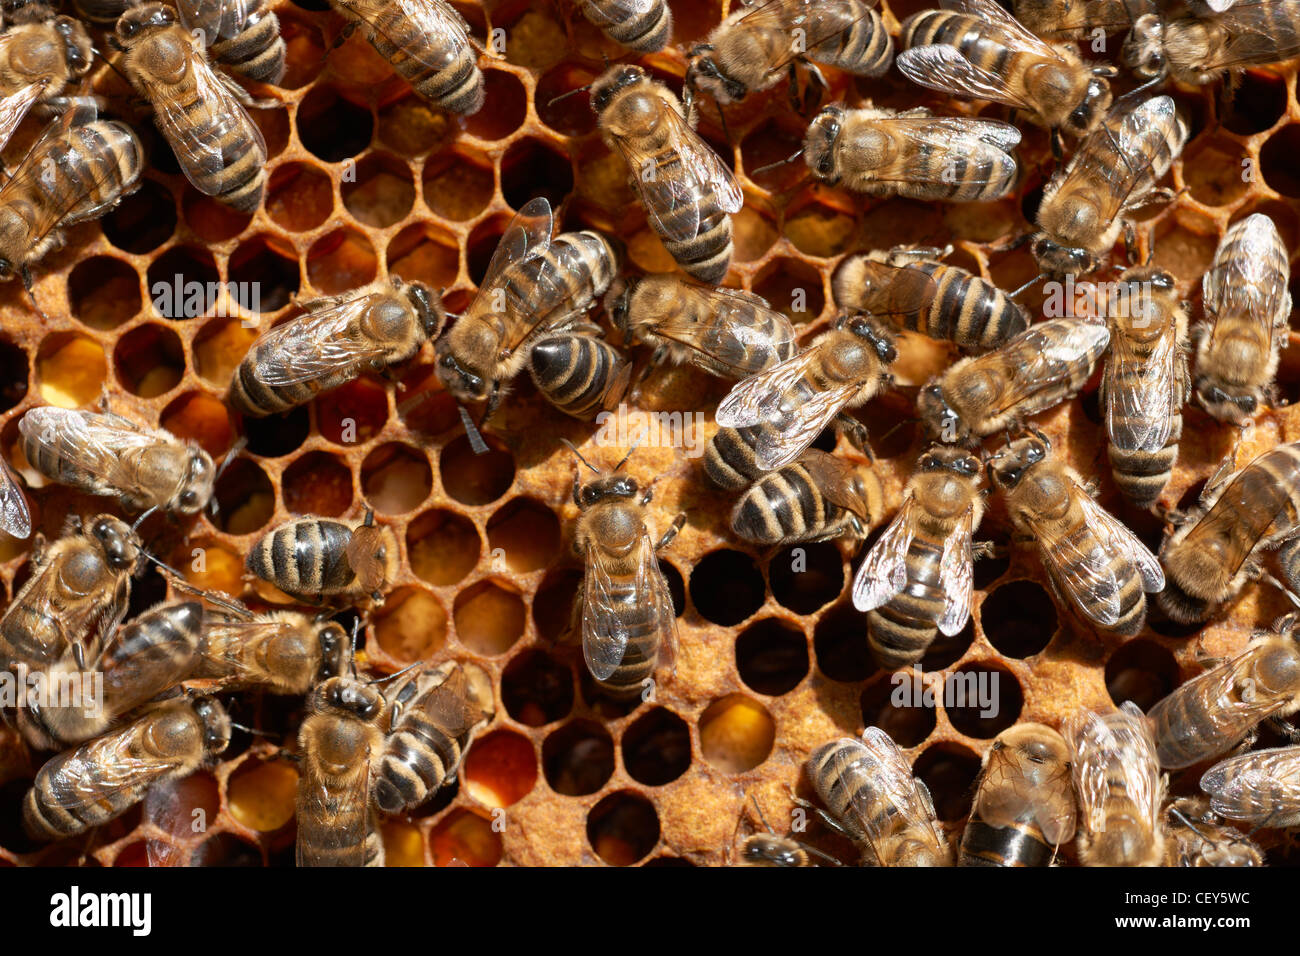 Honey bee workers on honey-comb close-up Stock Photo